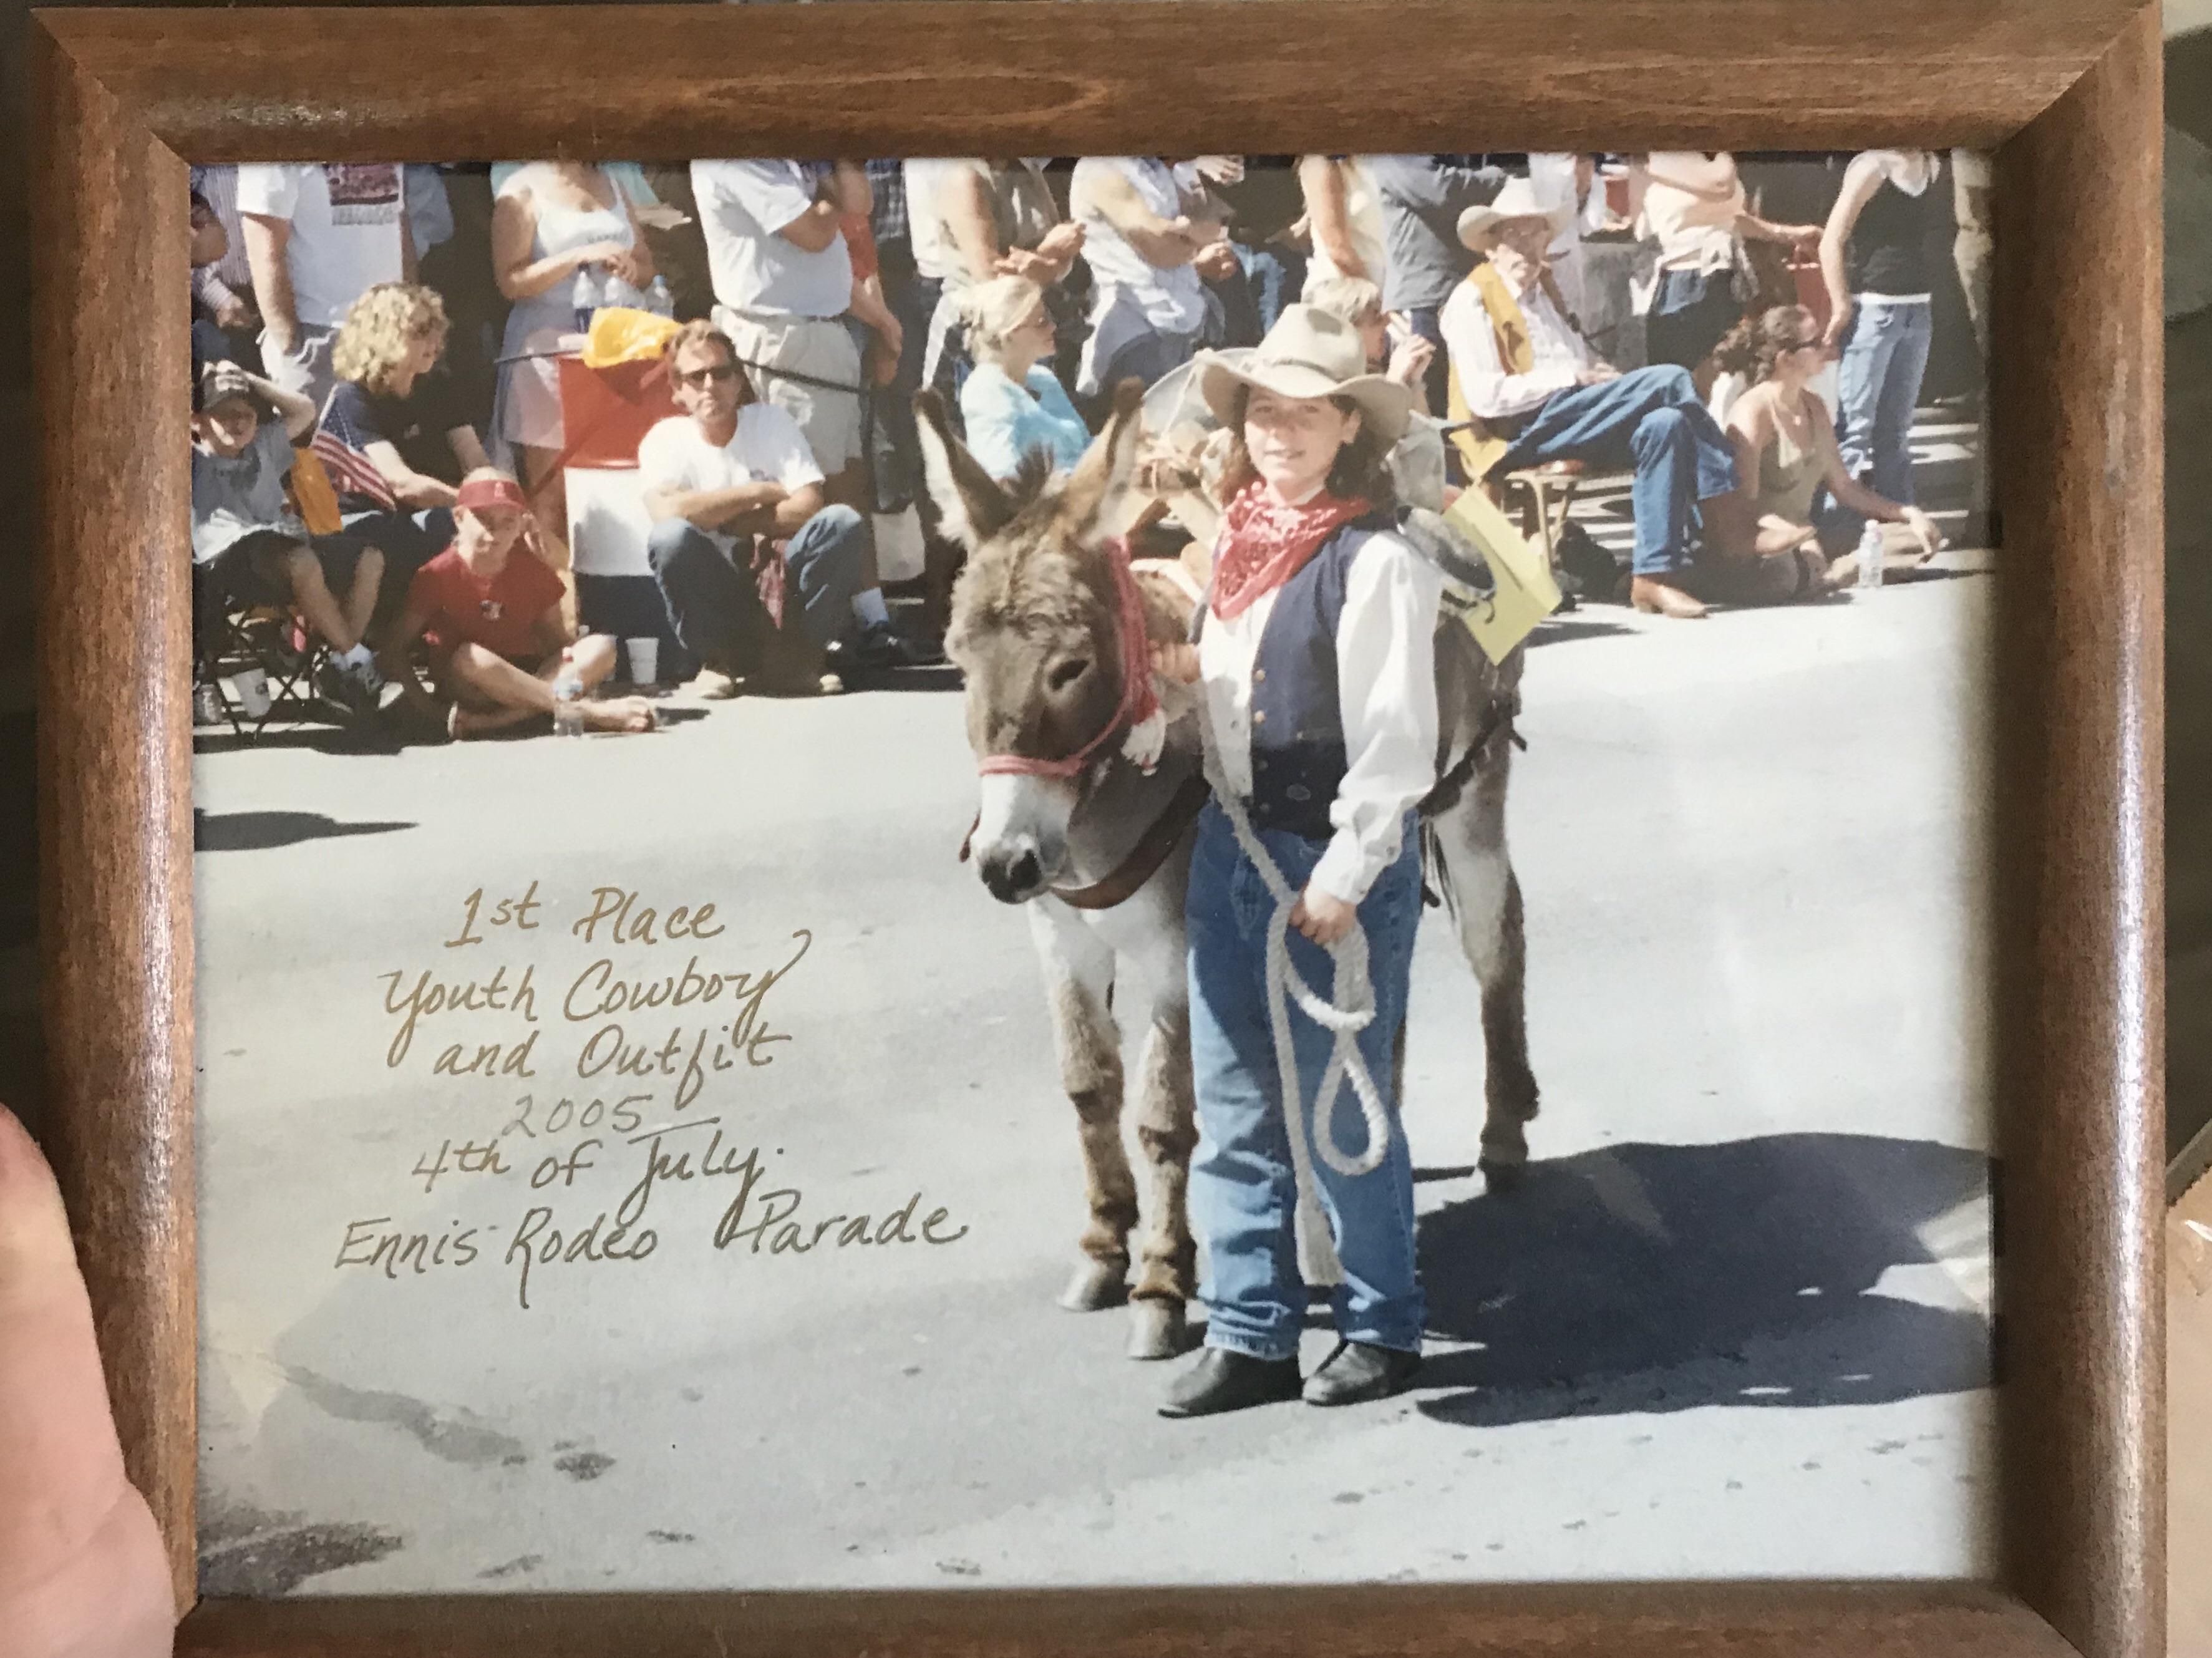 I’m a girl, and instead of winning 1st place in the youth cowGIRL division, the judges thought I was a boy gave me 1st in the cowboy one. Yeehaw